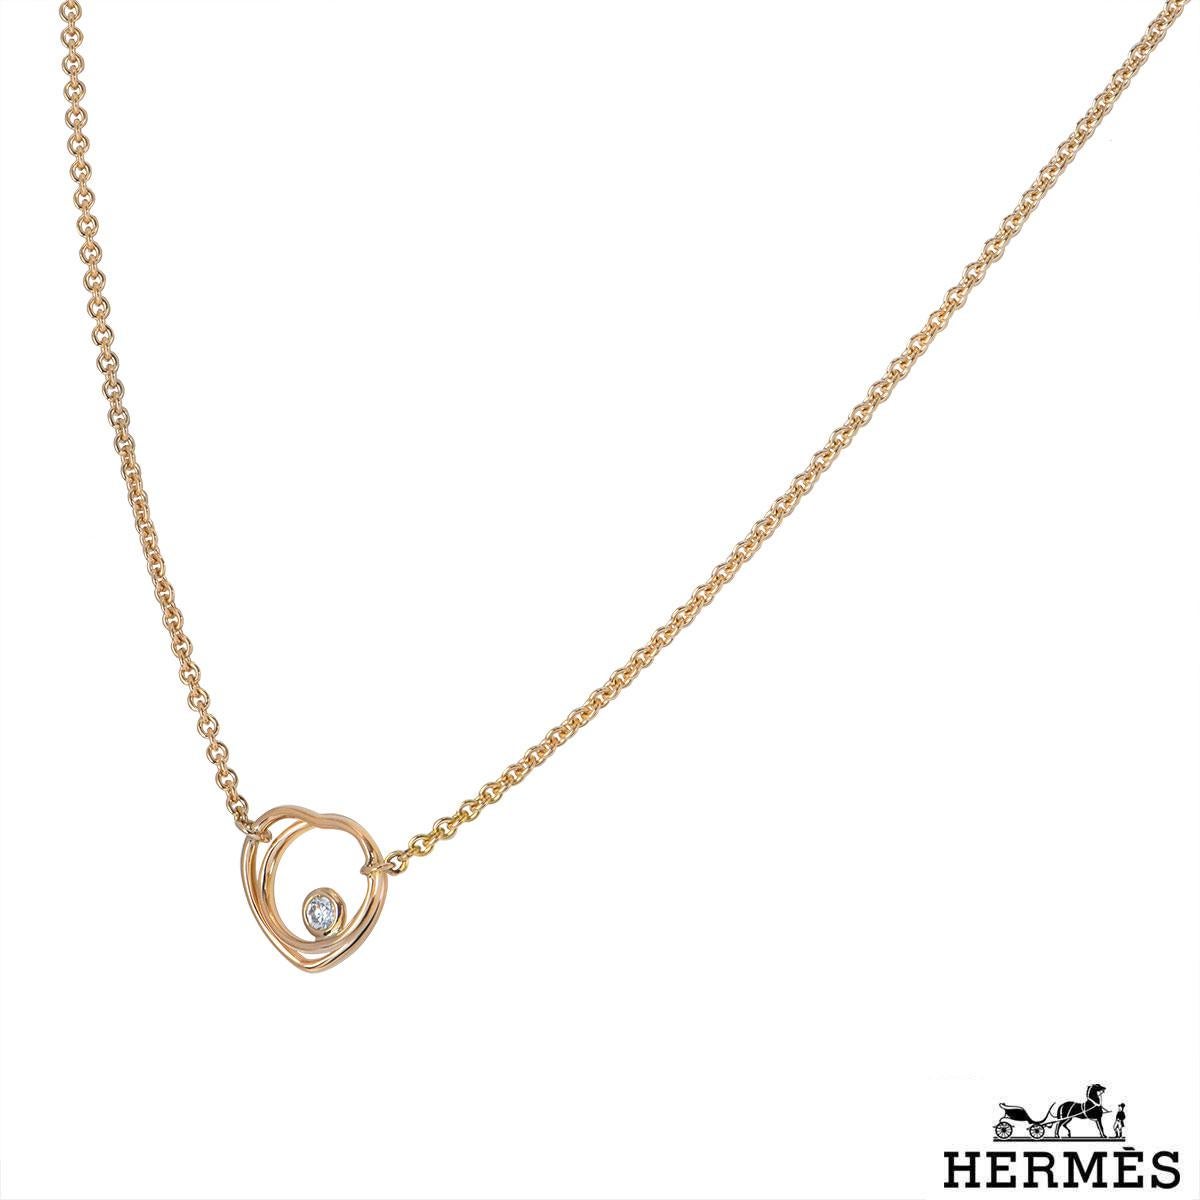 An 18k rose gold diamond necklace by Hermes from the Vertige Couer collection. The necklace features an openwork heart motif with a single round brilliant cut diamond. The diamond has a total weight of 0.05ct. The necklace has an adjustable length